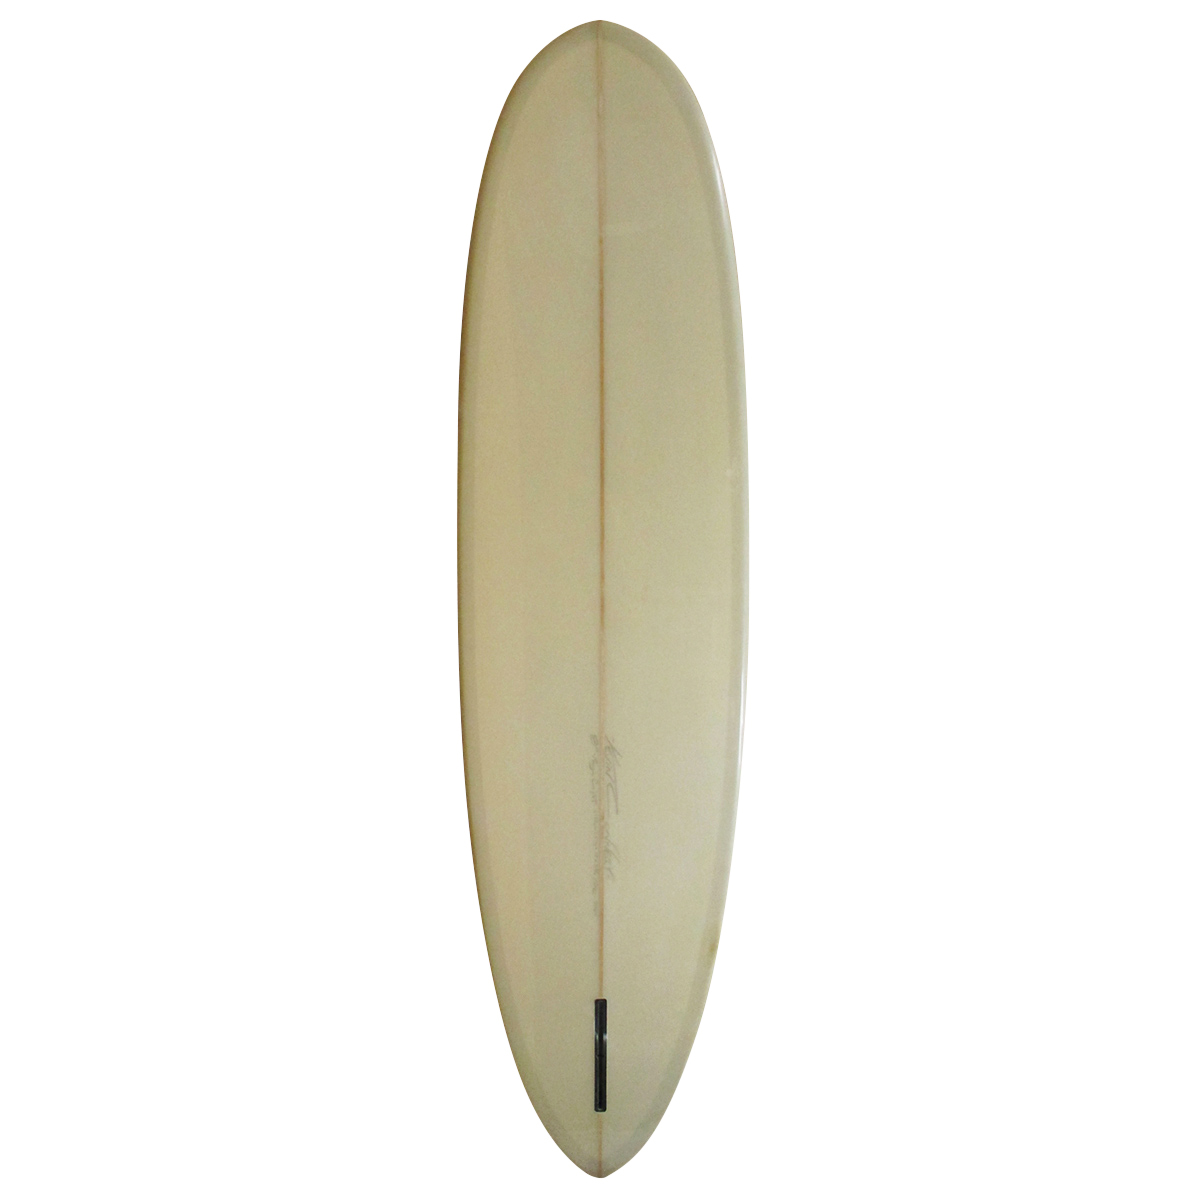 YU SURF CLASSIC / MAGIC CARPET 8`0 Shaped by KEVIN CONNELLY